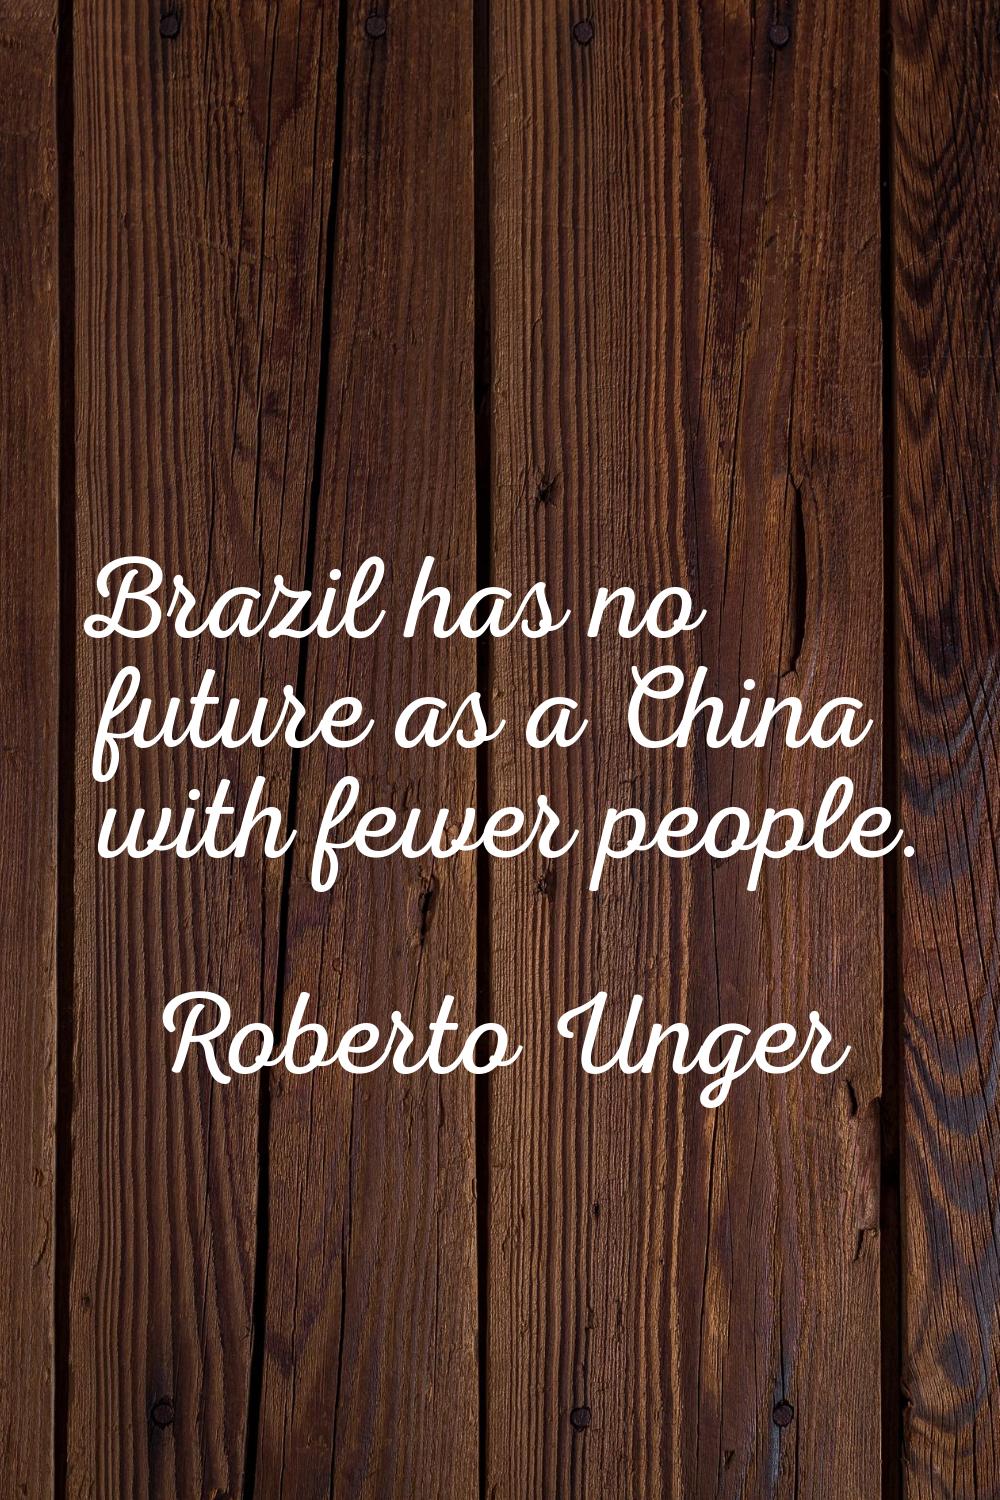 Brazil has no future as a China with fewer people.